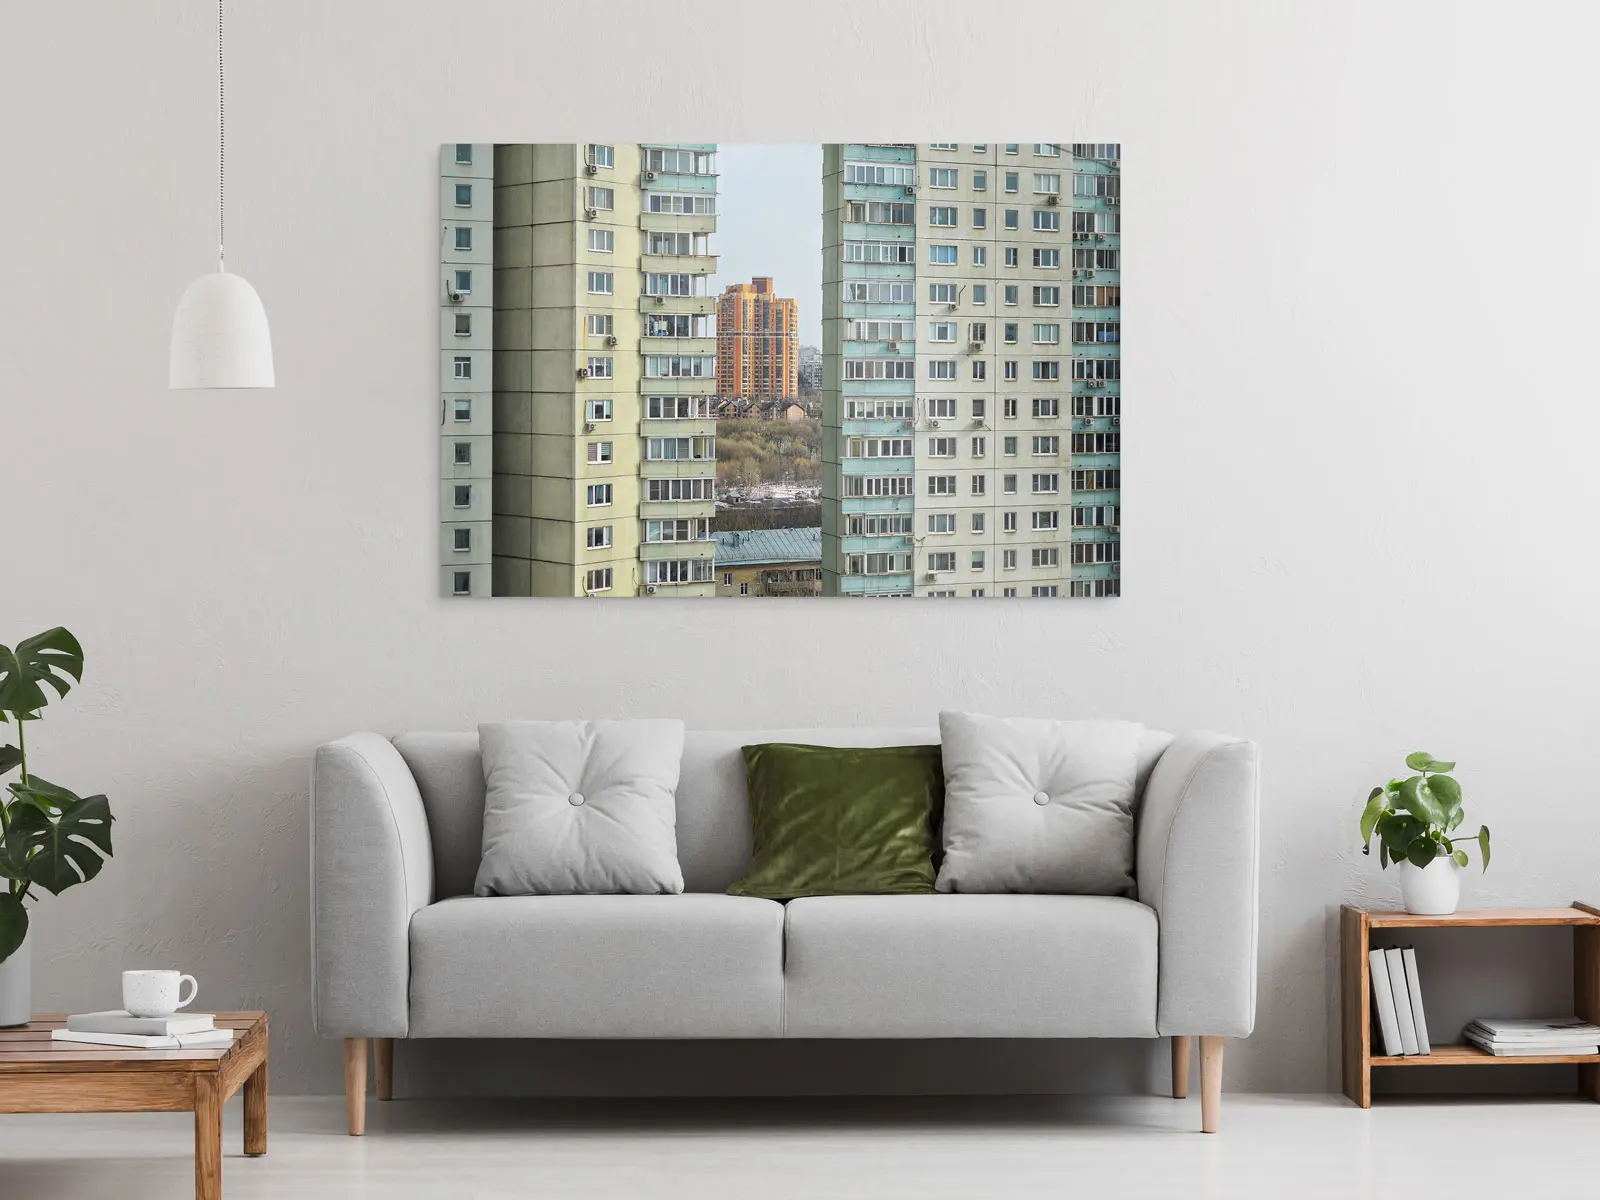 Windows on skyscraper on direct Print On Aluminum Dibond hangs on a wall in a living room.